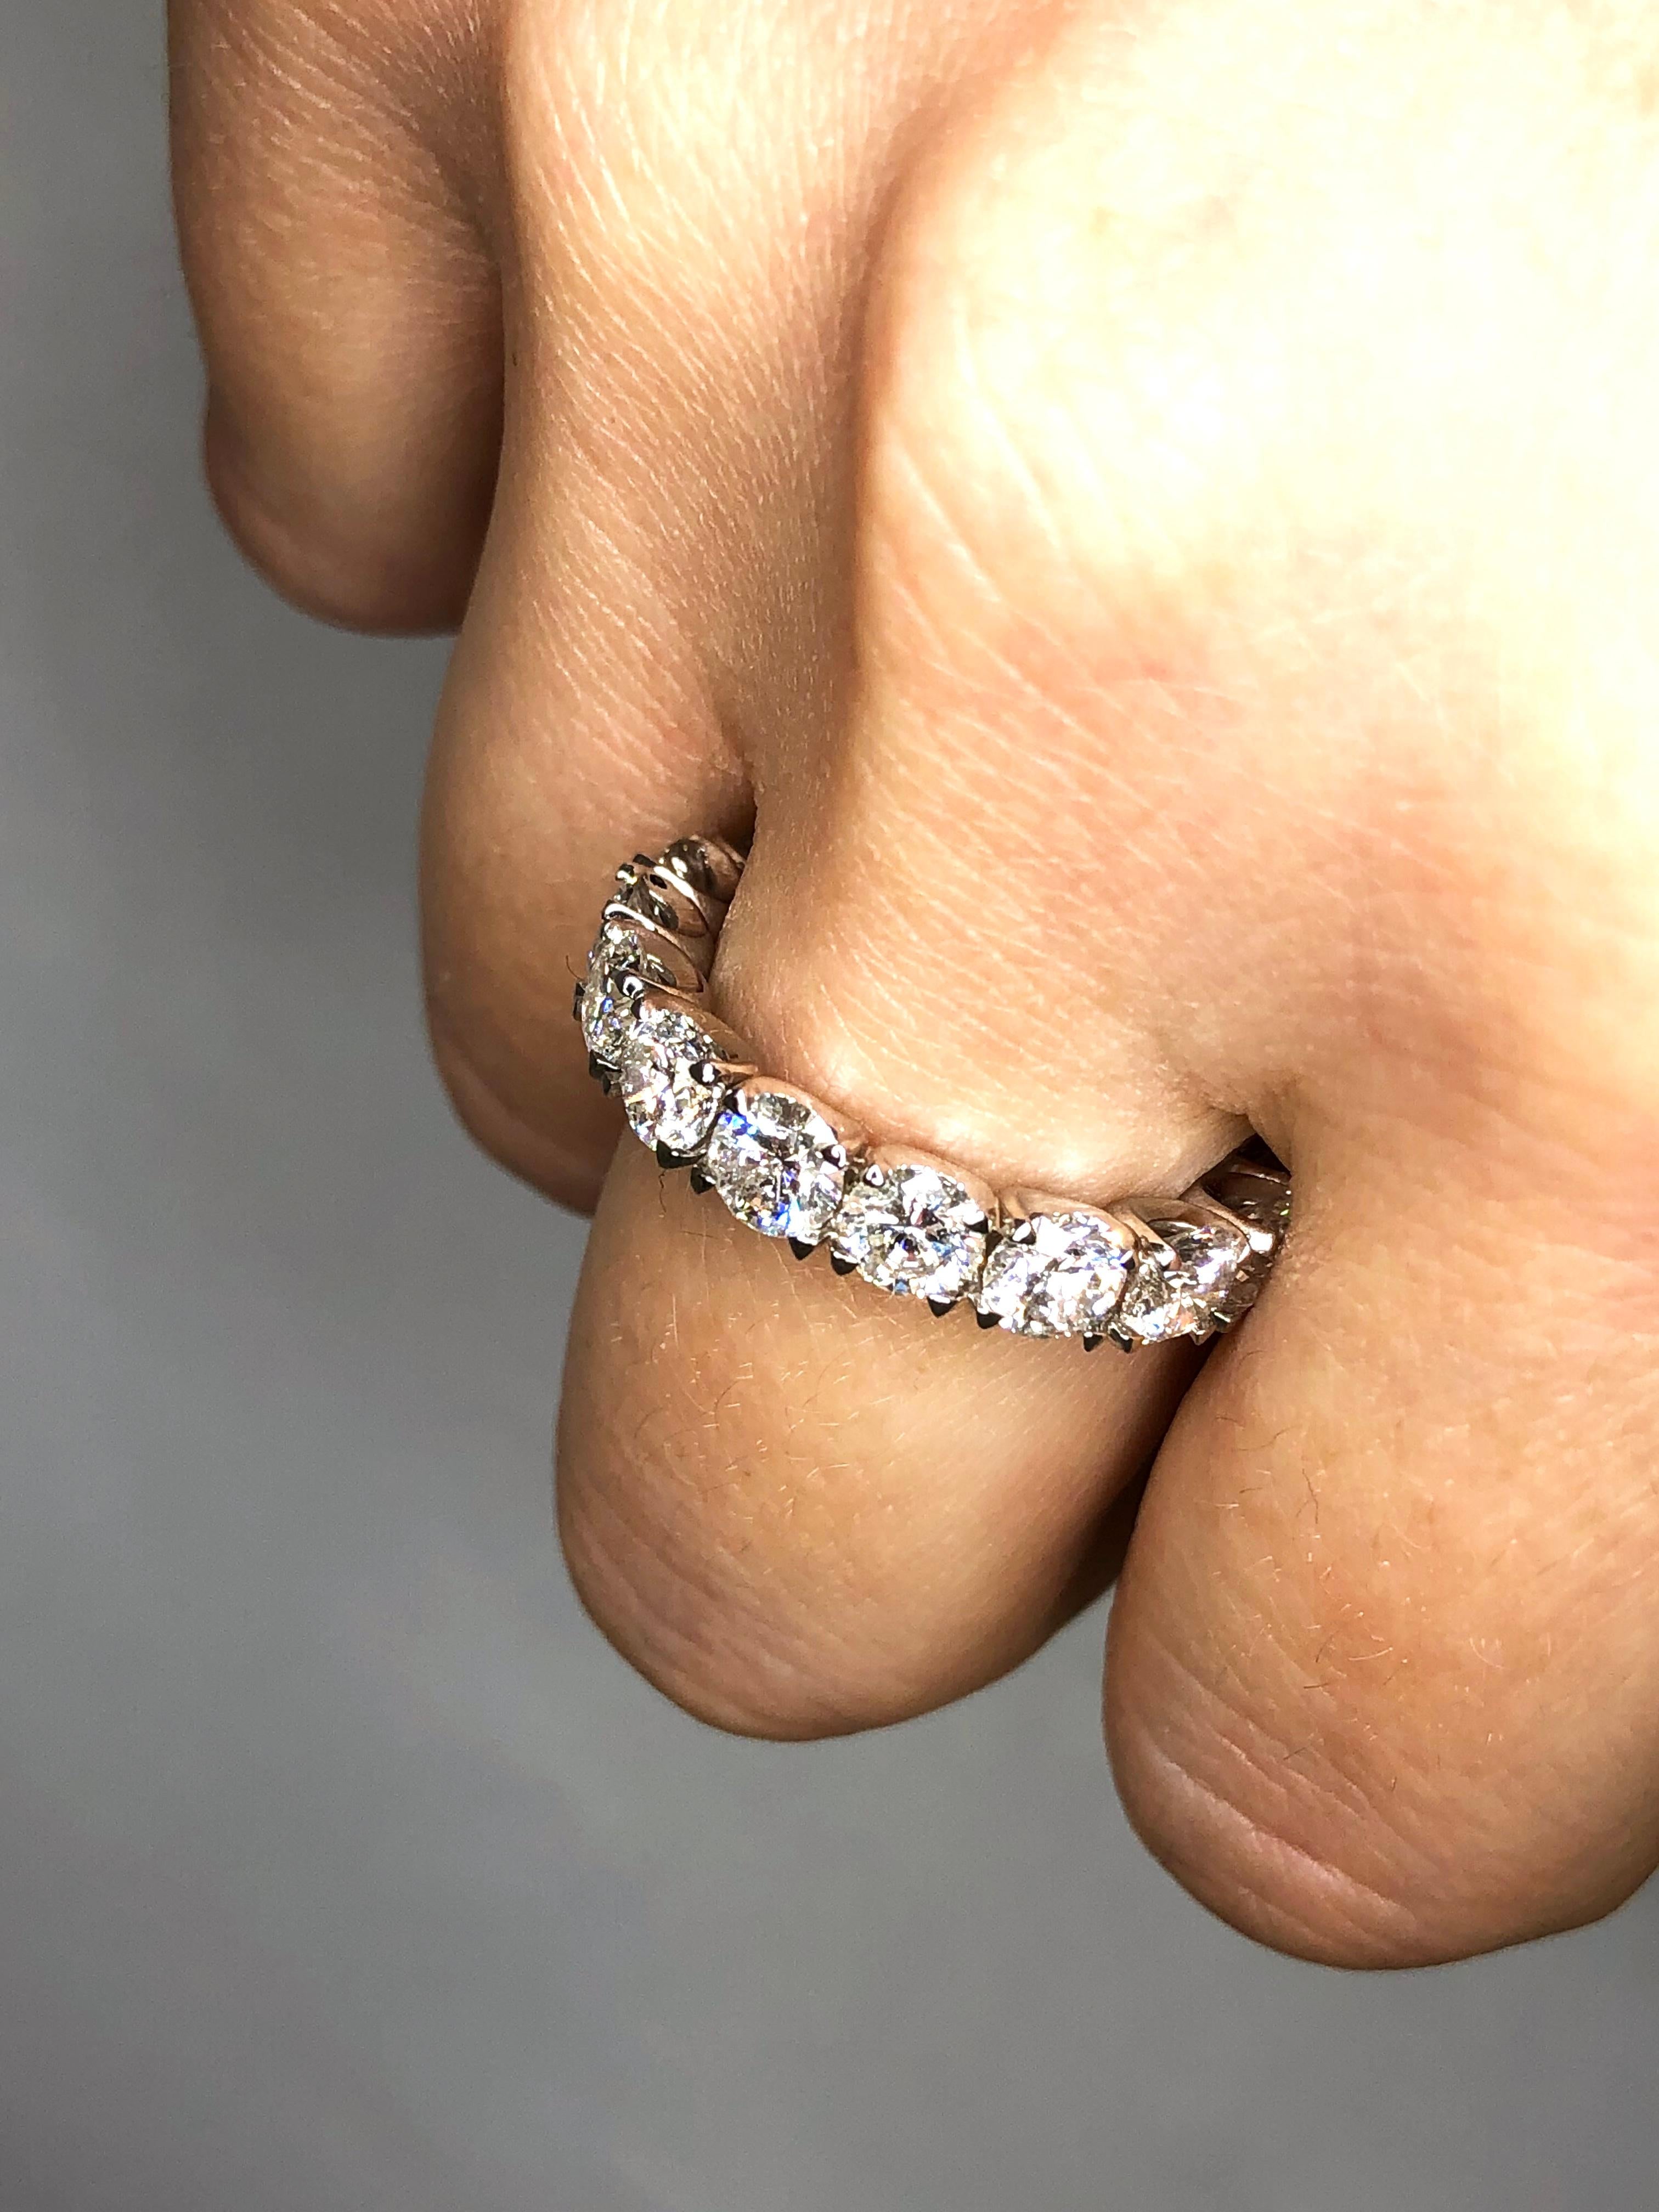 Diamond Eternity Band set in 14K White gold. 16 Round Brilliant diamonds: F-G VS2-SI1. Carat weight: 4.40ct. Total ring weight: 4.1 grams. Ring size: 5.5. Can be sized upon request. This ring is customizable, price may vary depending on